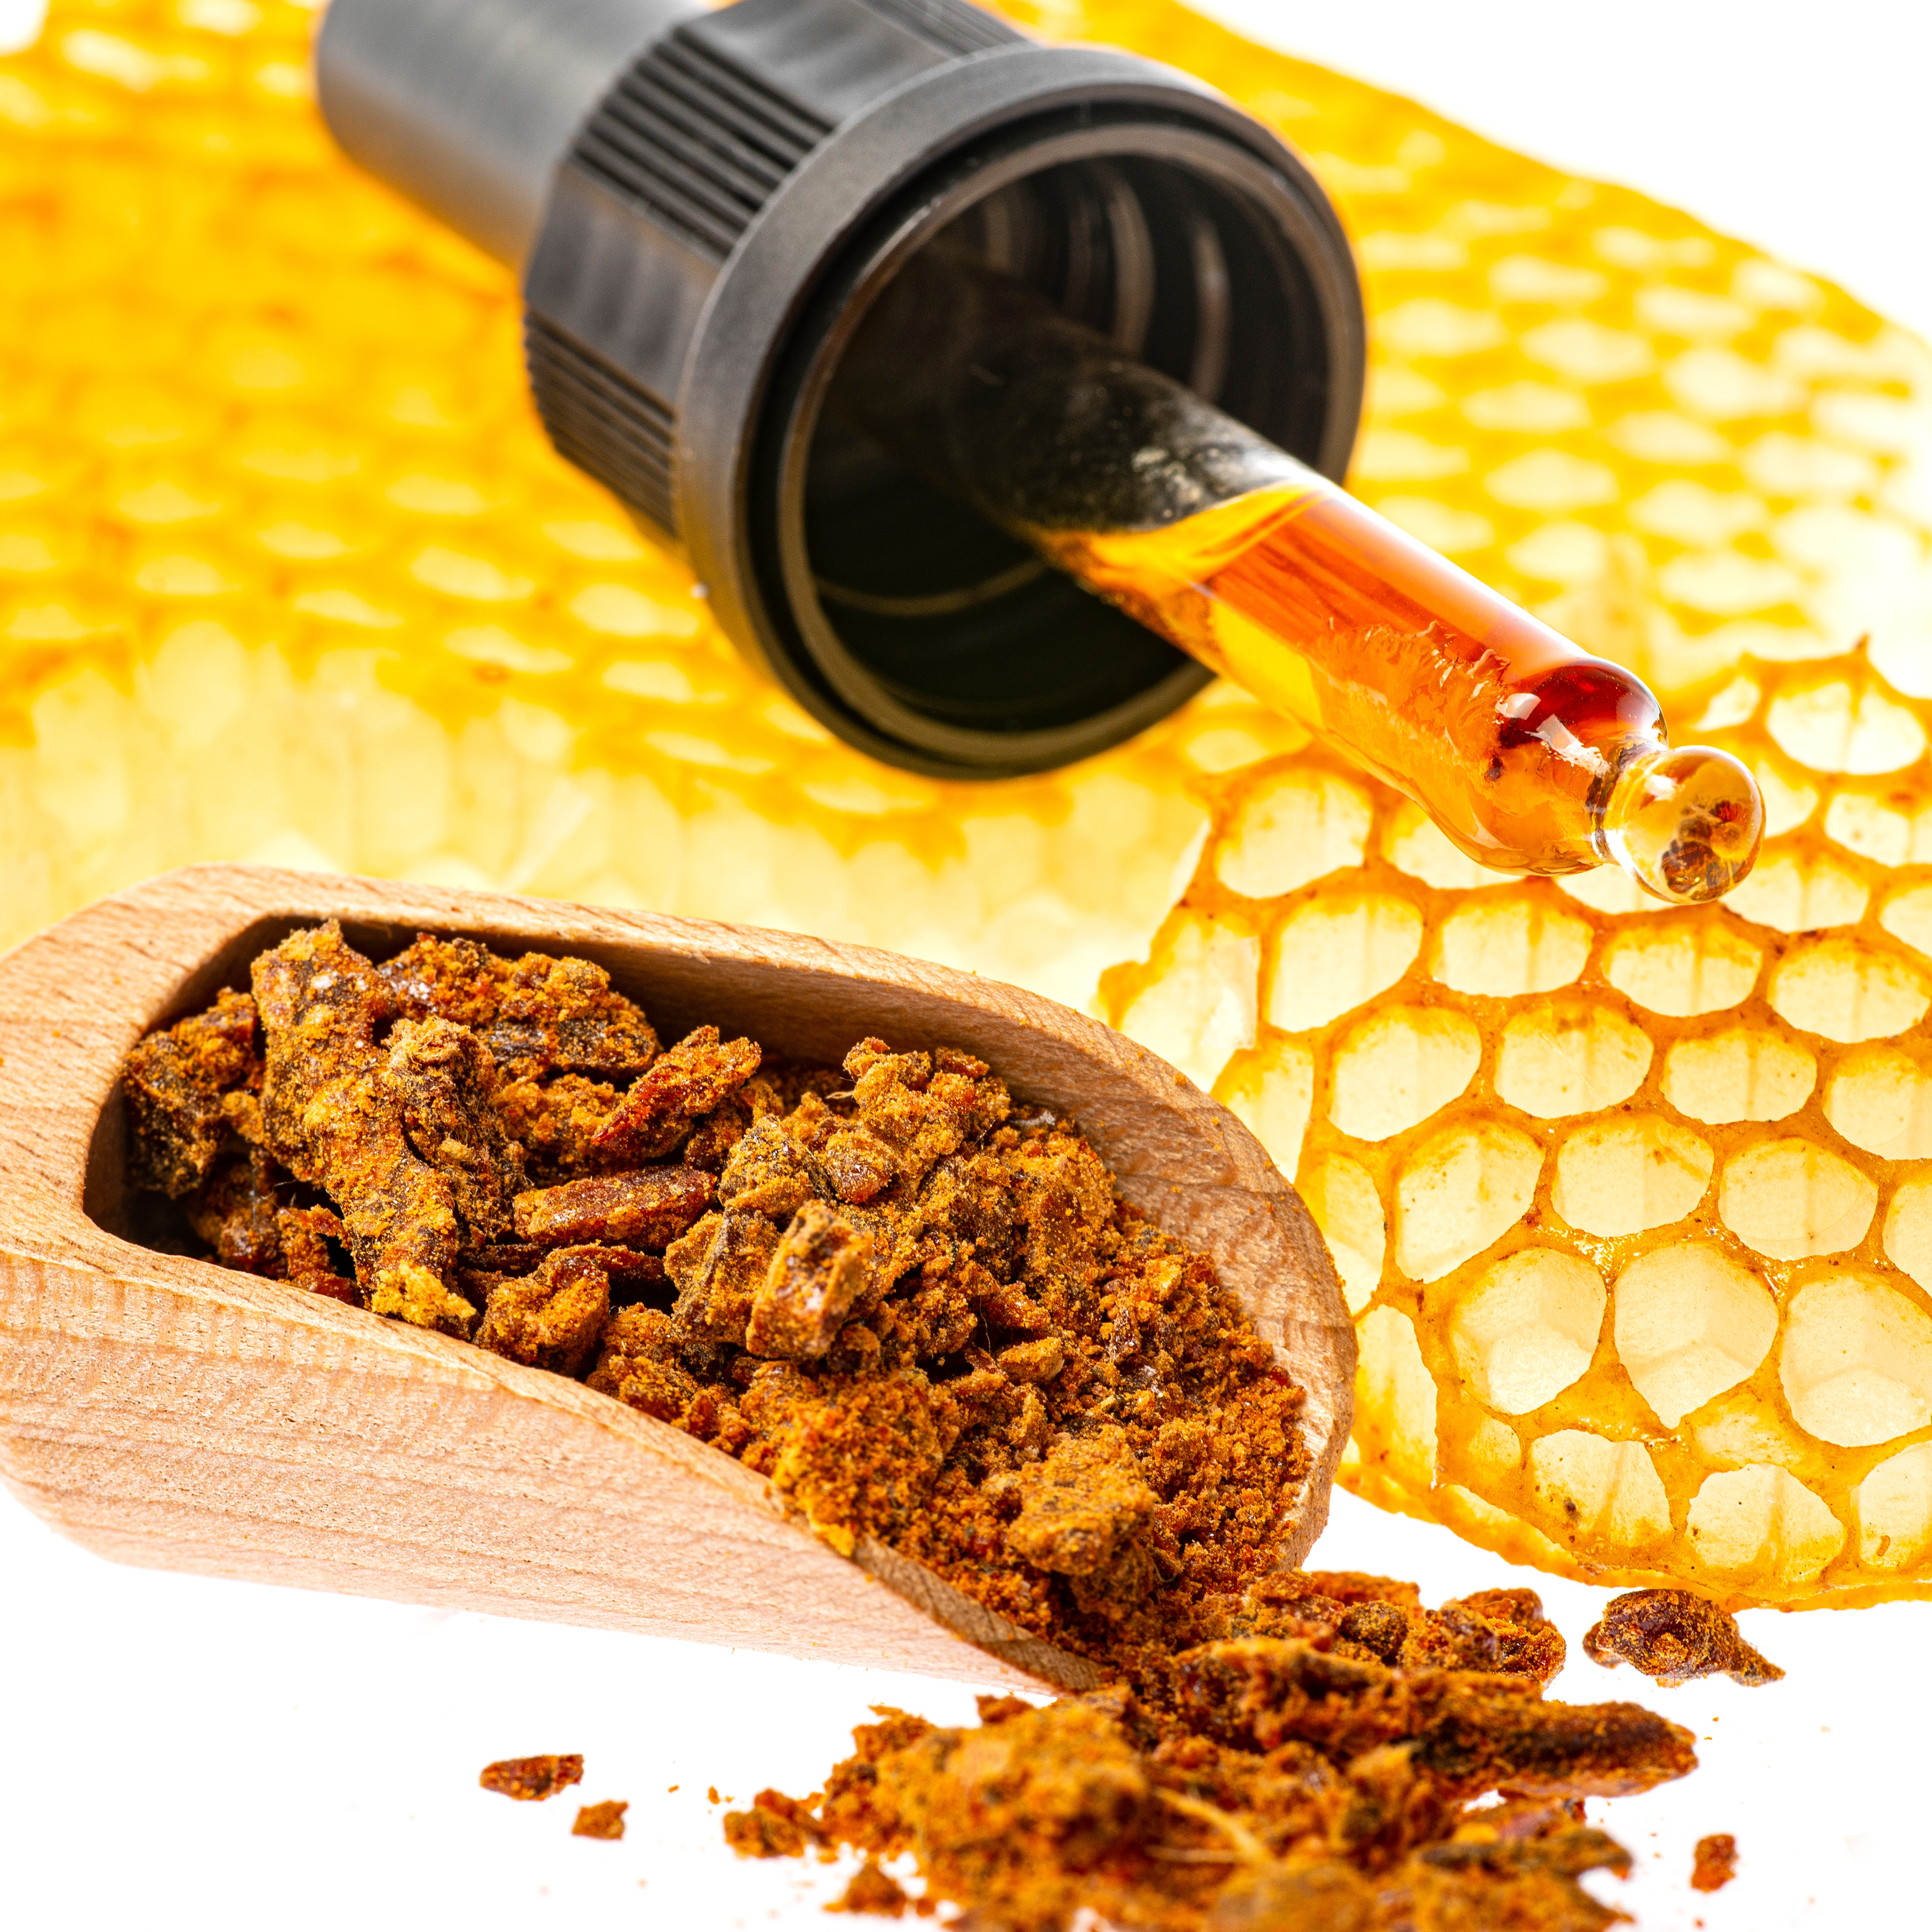 What is Propolis